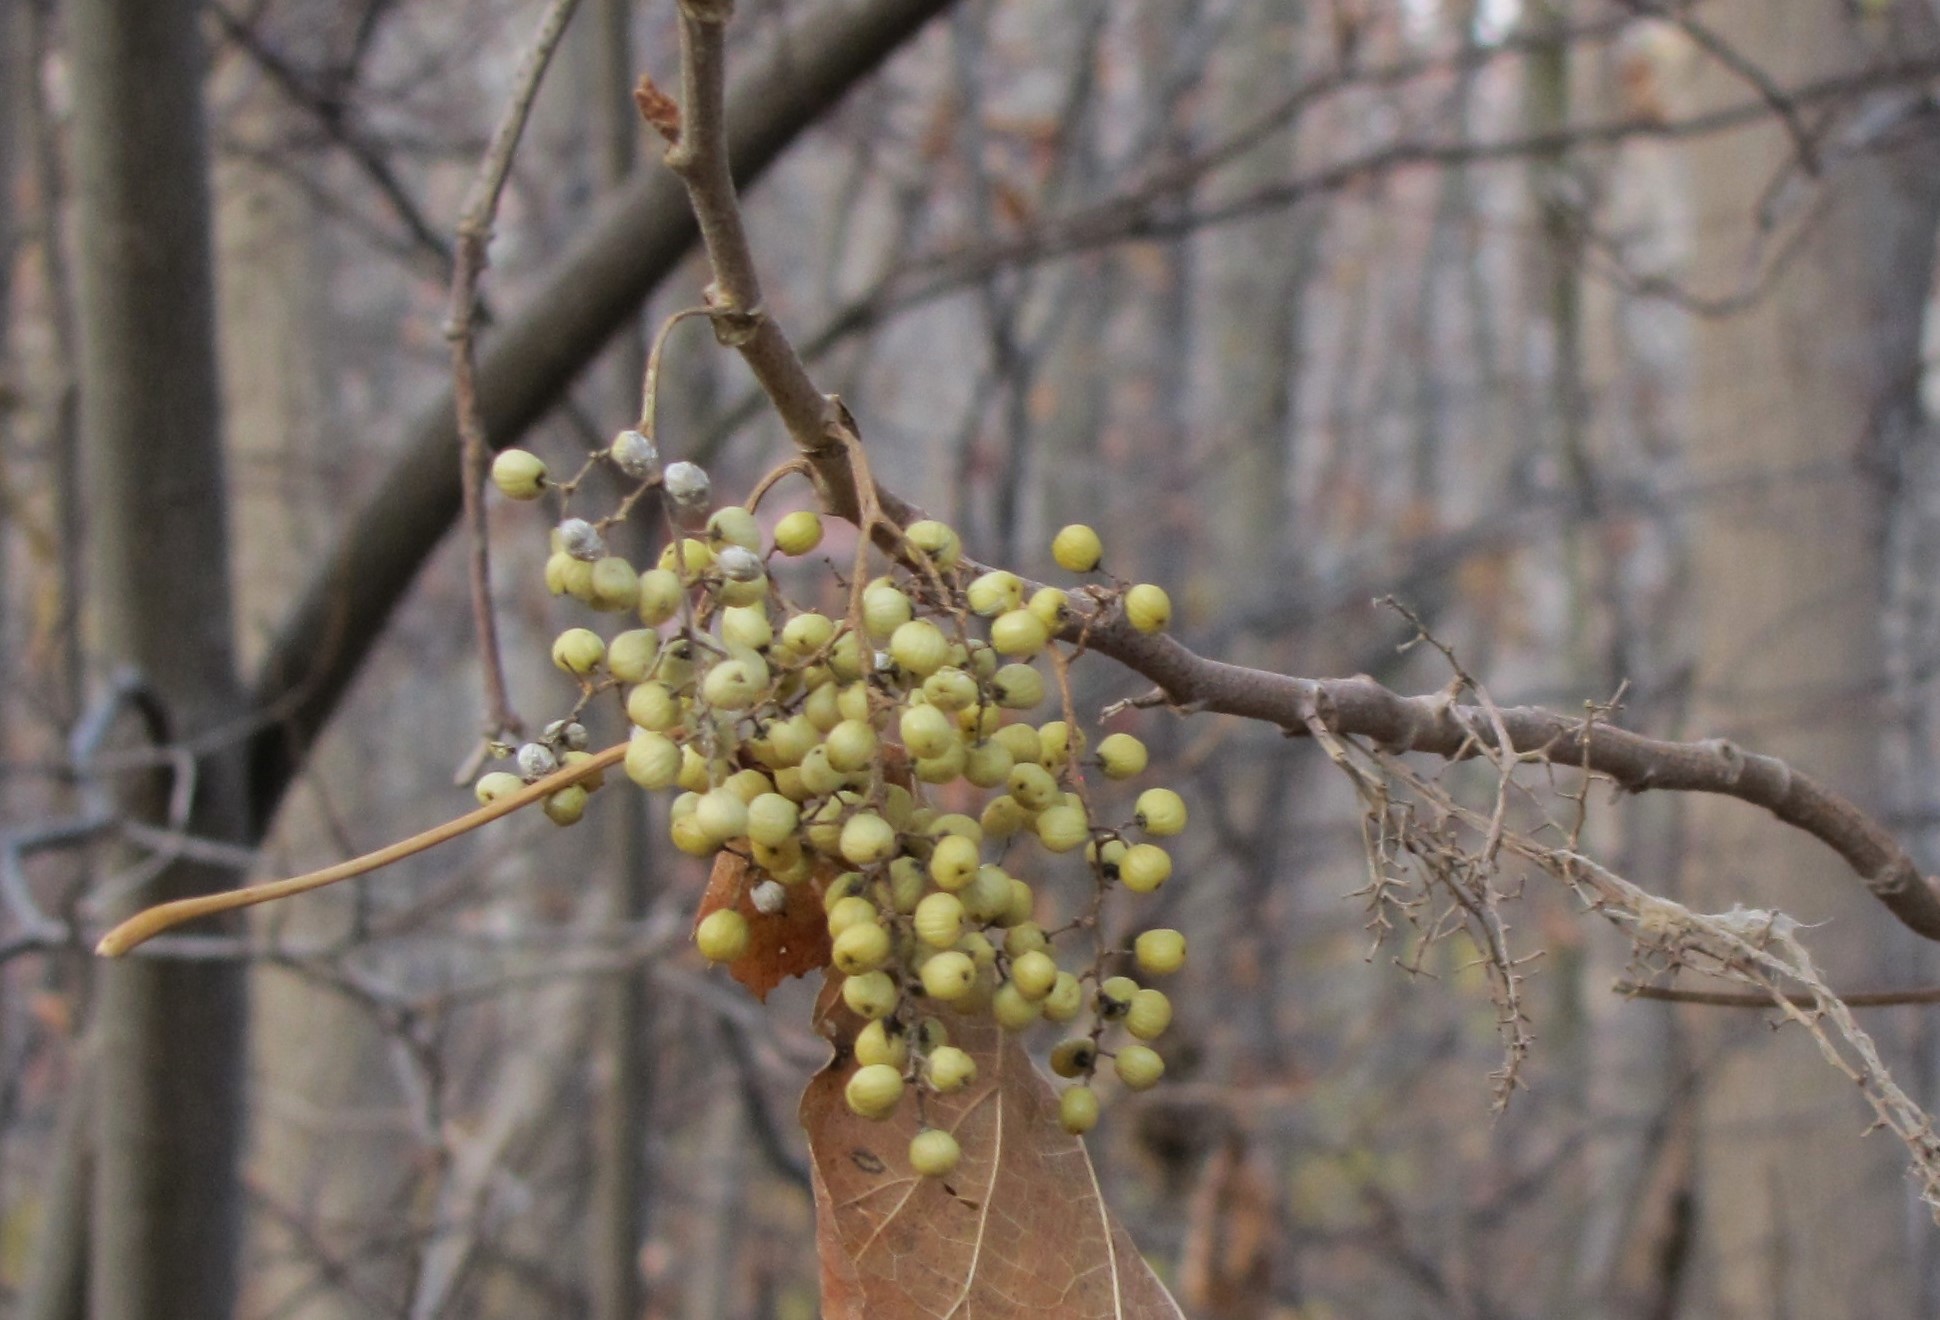 Pale green poison sumac berries hang in a cluster off bare branches on a cloudy day.